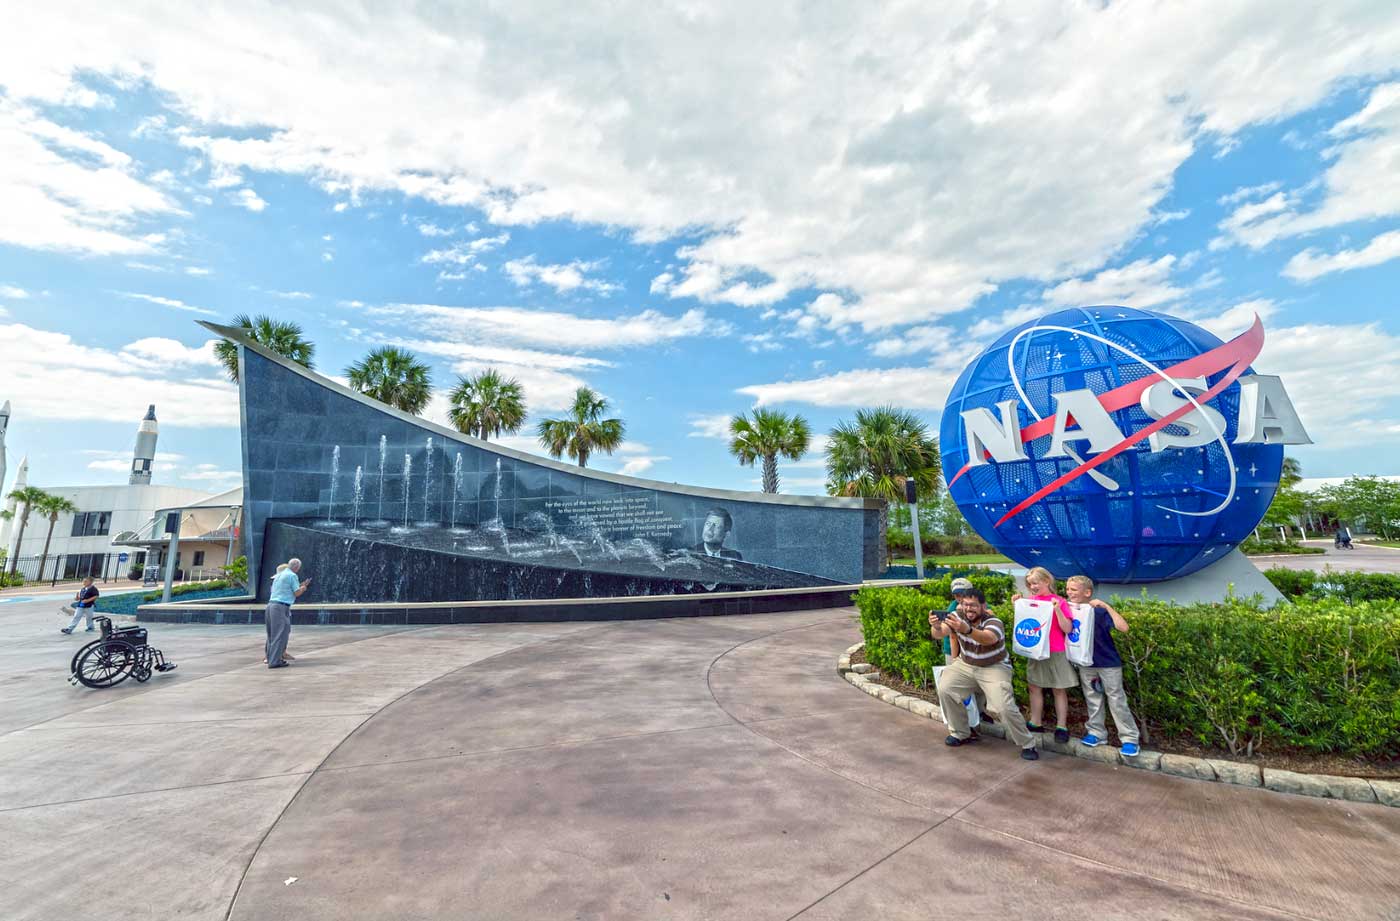 The Space Coast & Kennedy Space Center